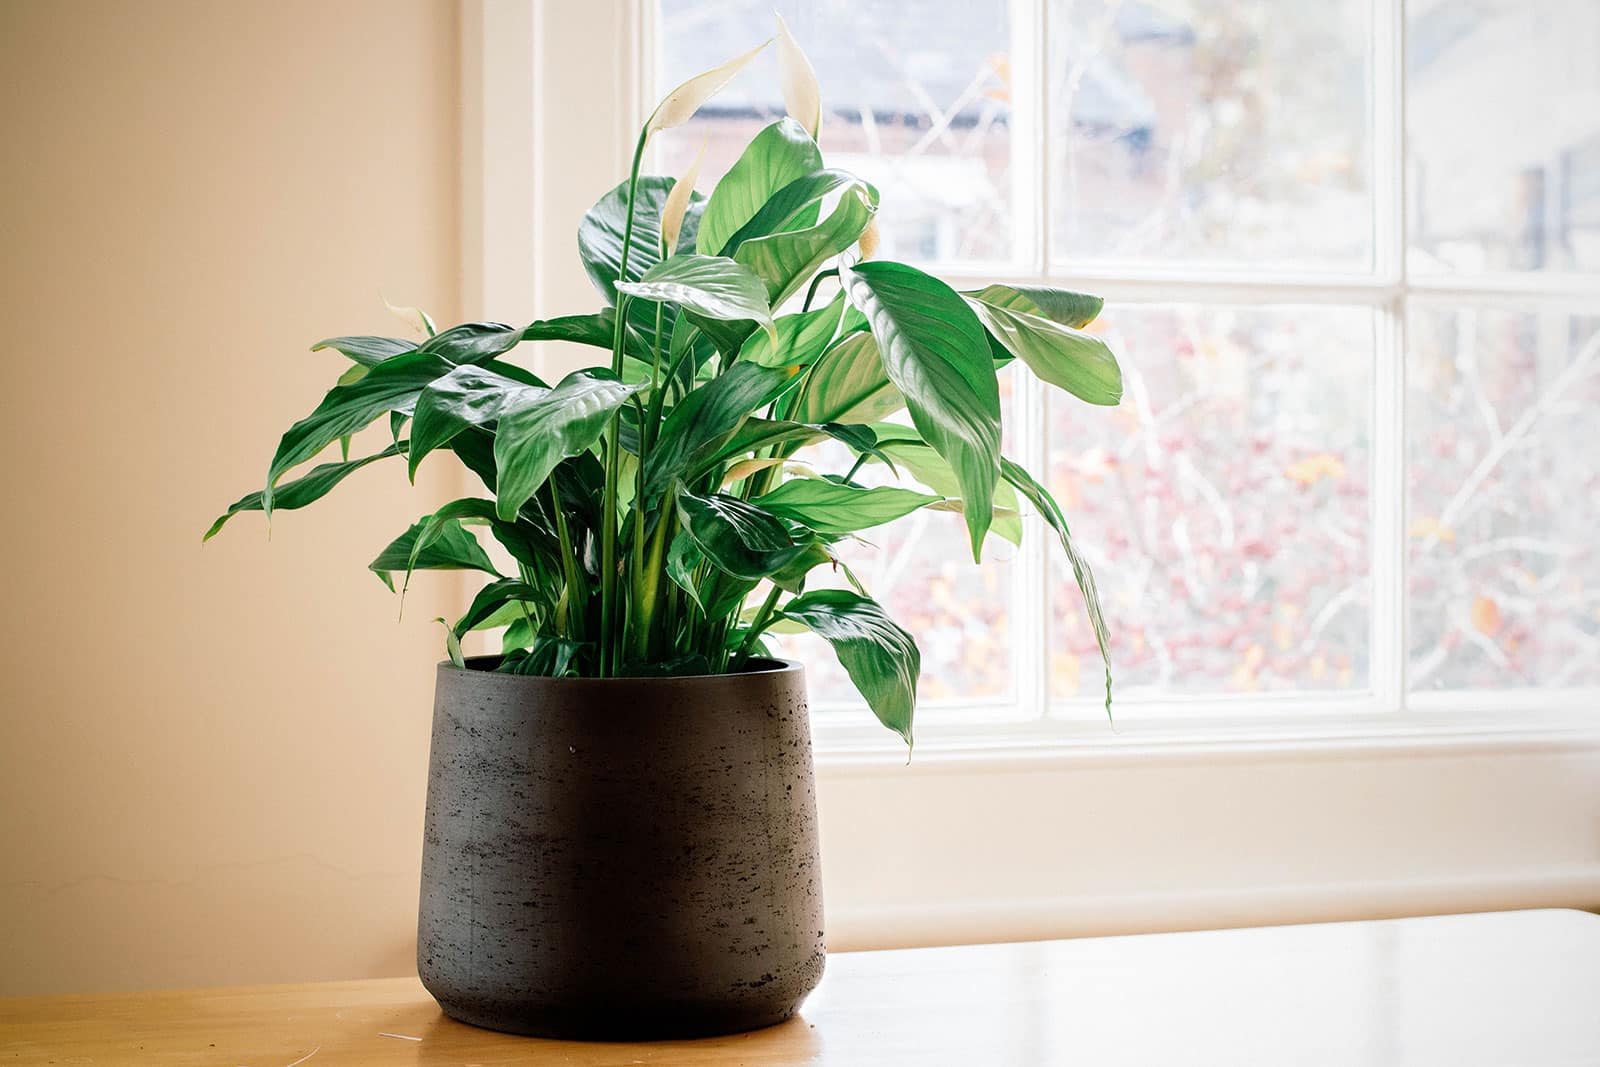 Peace lily plant in a black ceramic pot, shot on a wooden table near a window